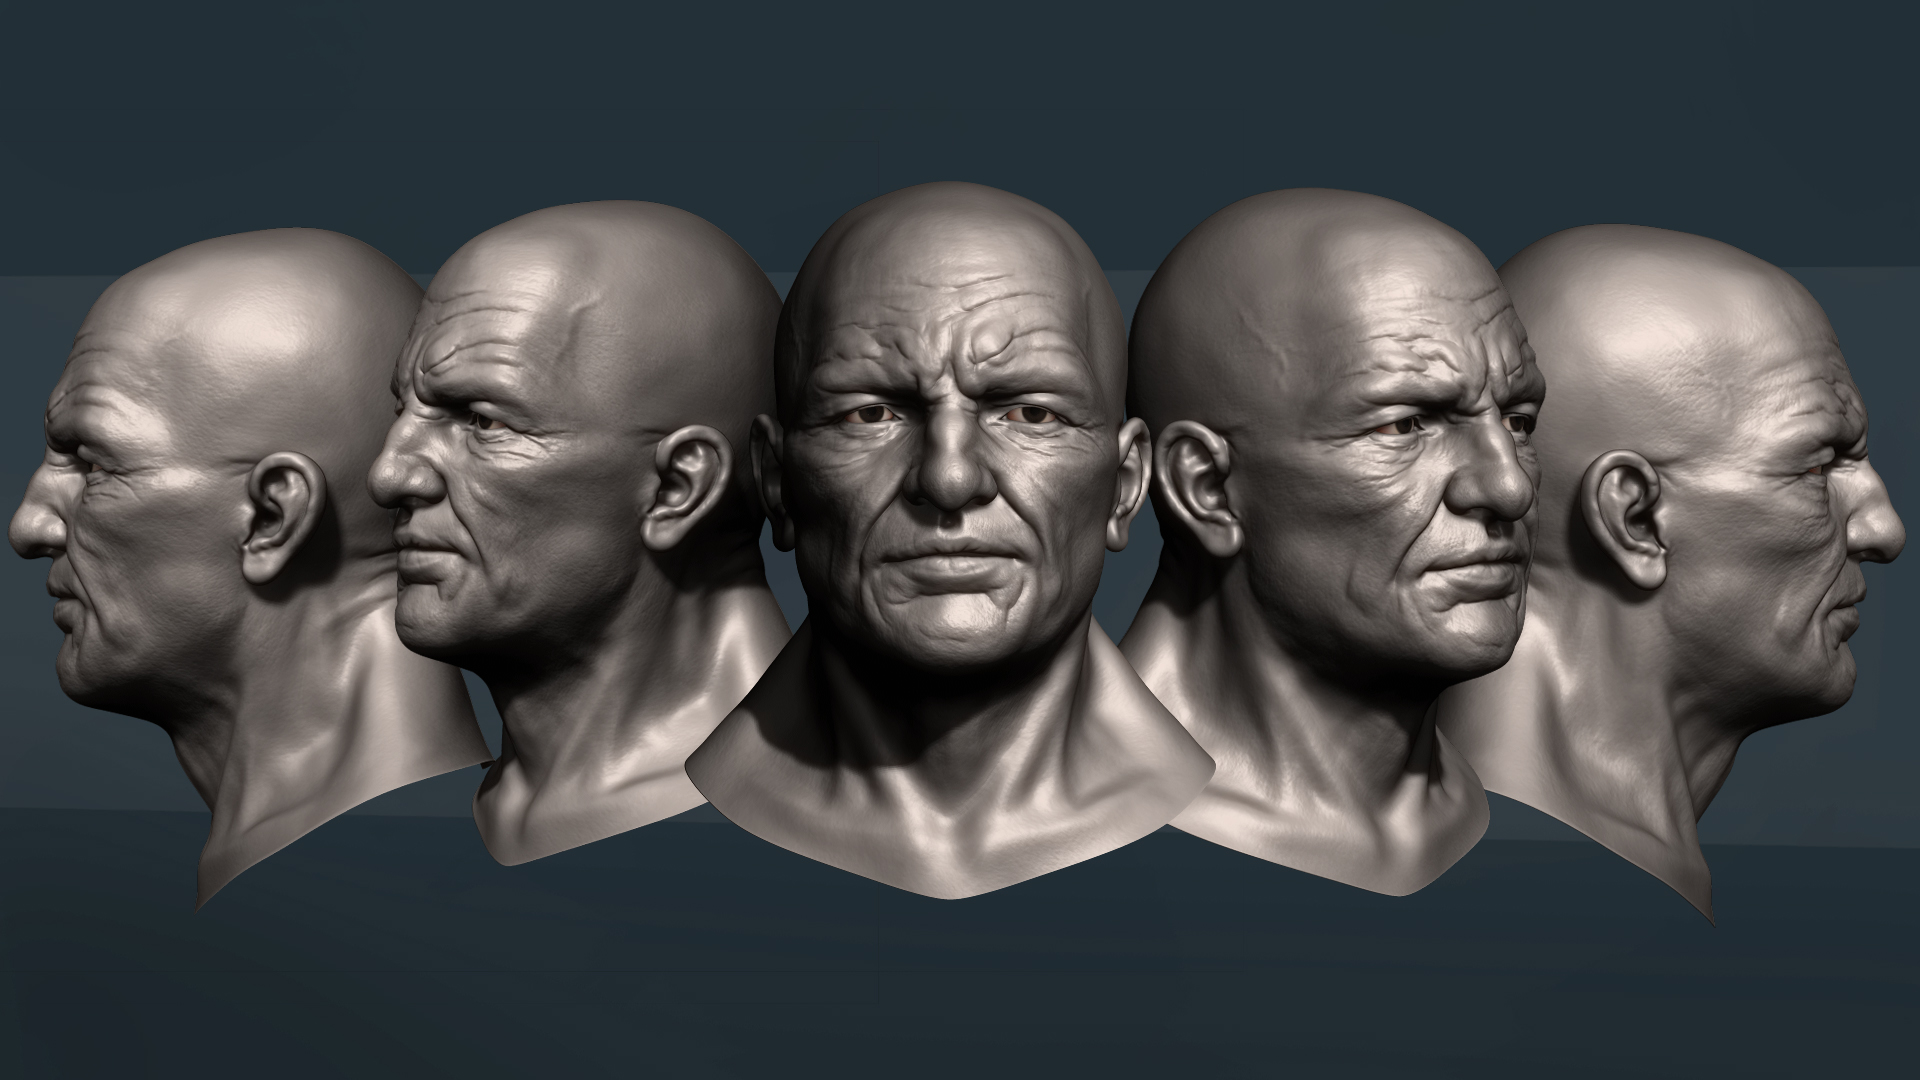 zbrush_heads omar chaouch.jpg